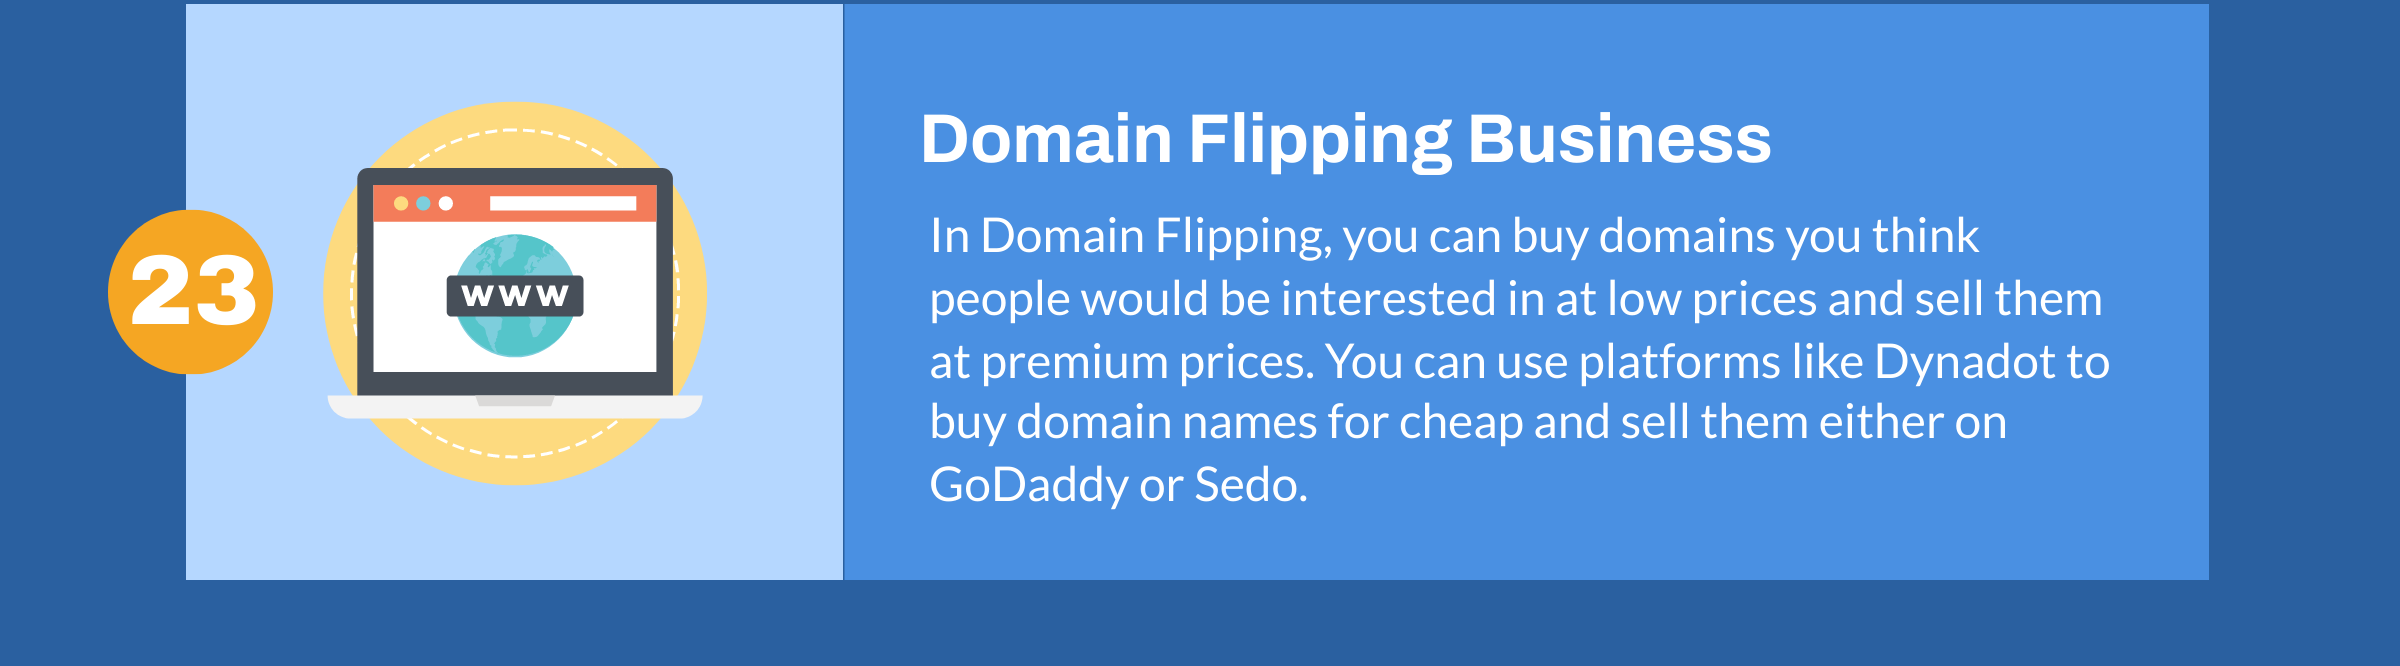 Domain Flipping Business